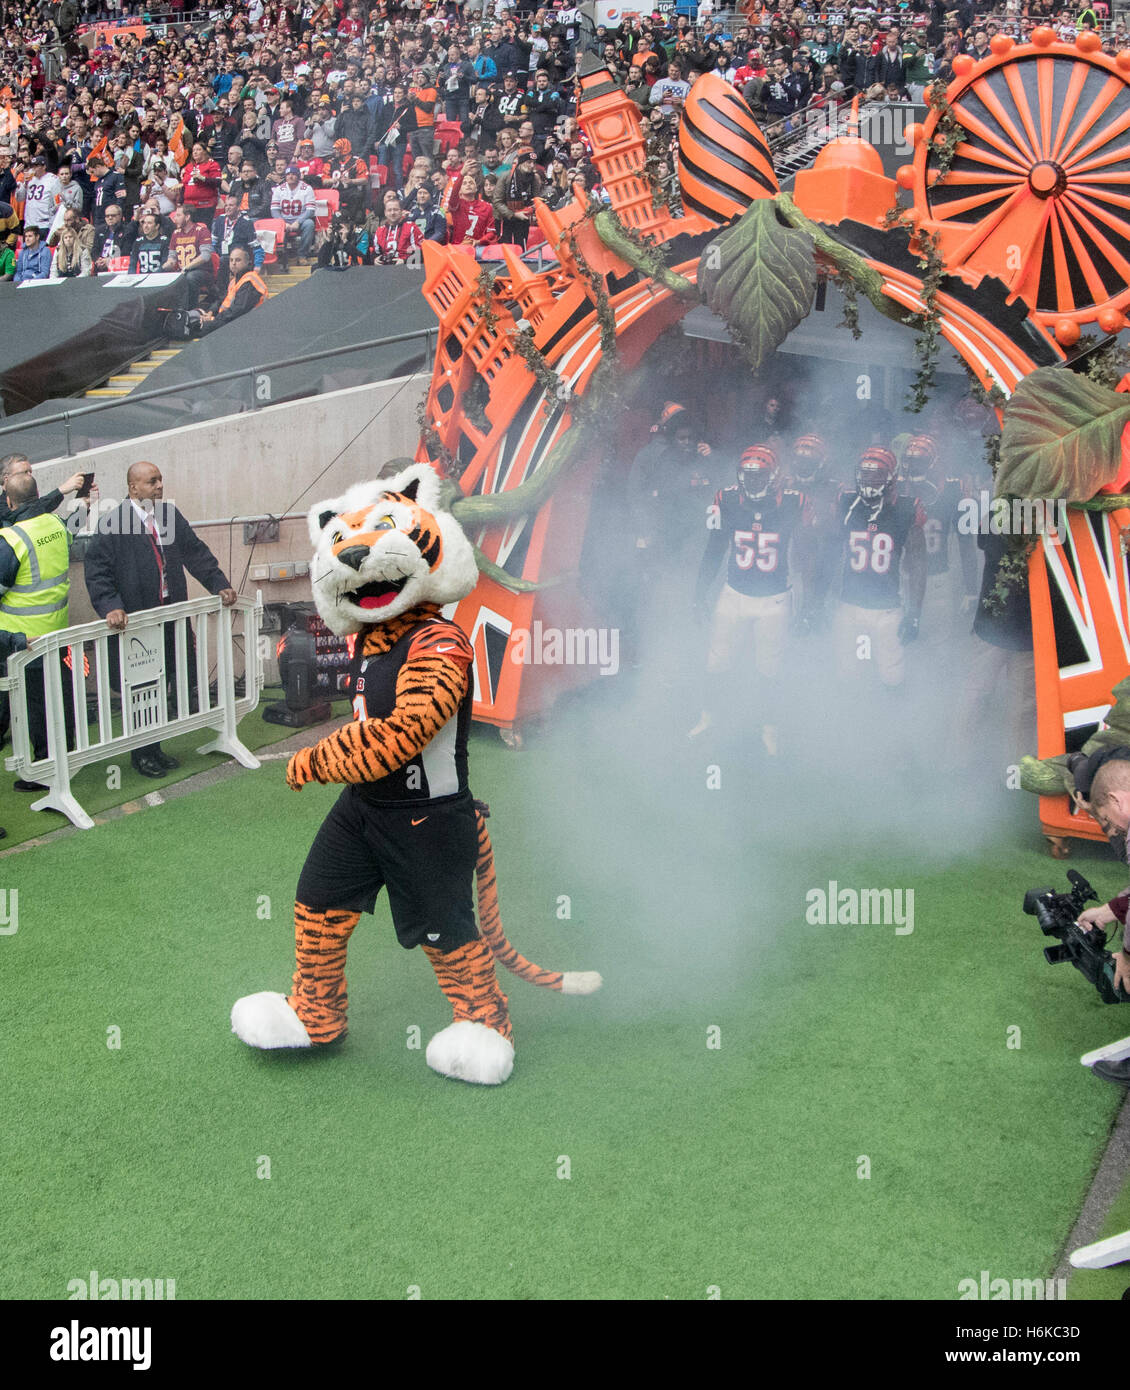 Wembley Stadium, London, UK. 30th Oct, 2016. NFL International Series. Cincinnati Bengals versus Washington Redskins. The Cincinnati Bengals team mascot WHO-DEY leads the team as it is introduced to the stadium fans through their team arch before the game. © Action Plus Sports/Alamy Live News Stock Photo